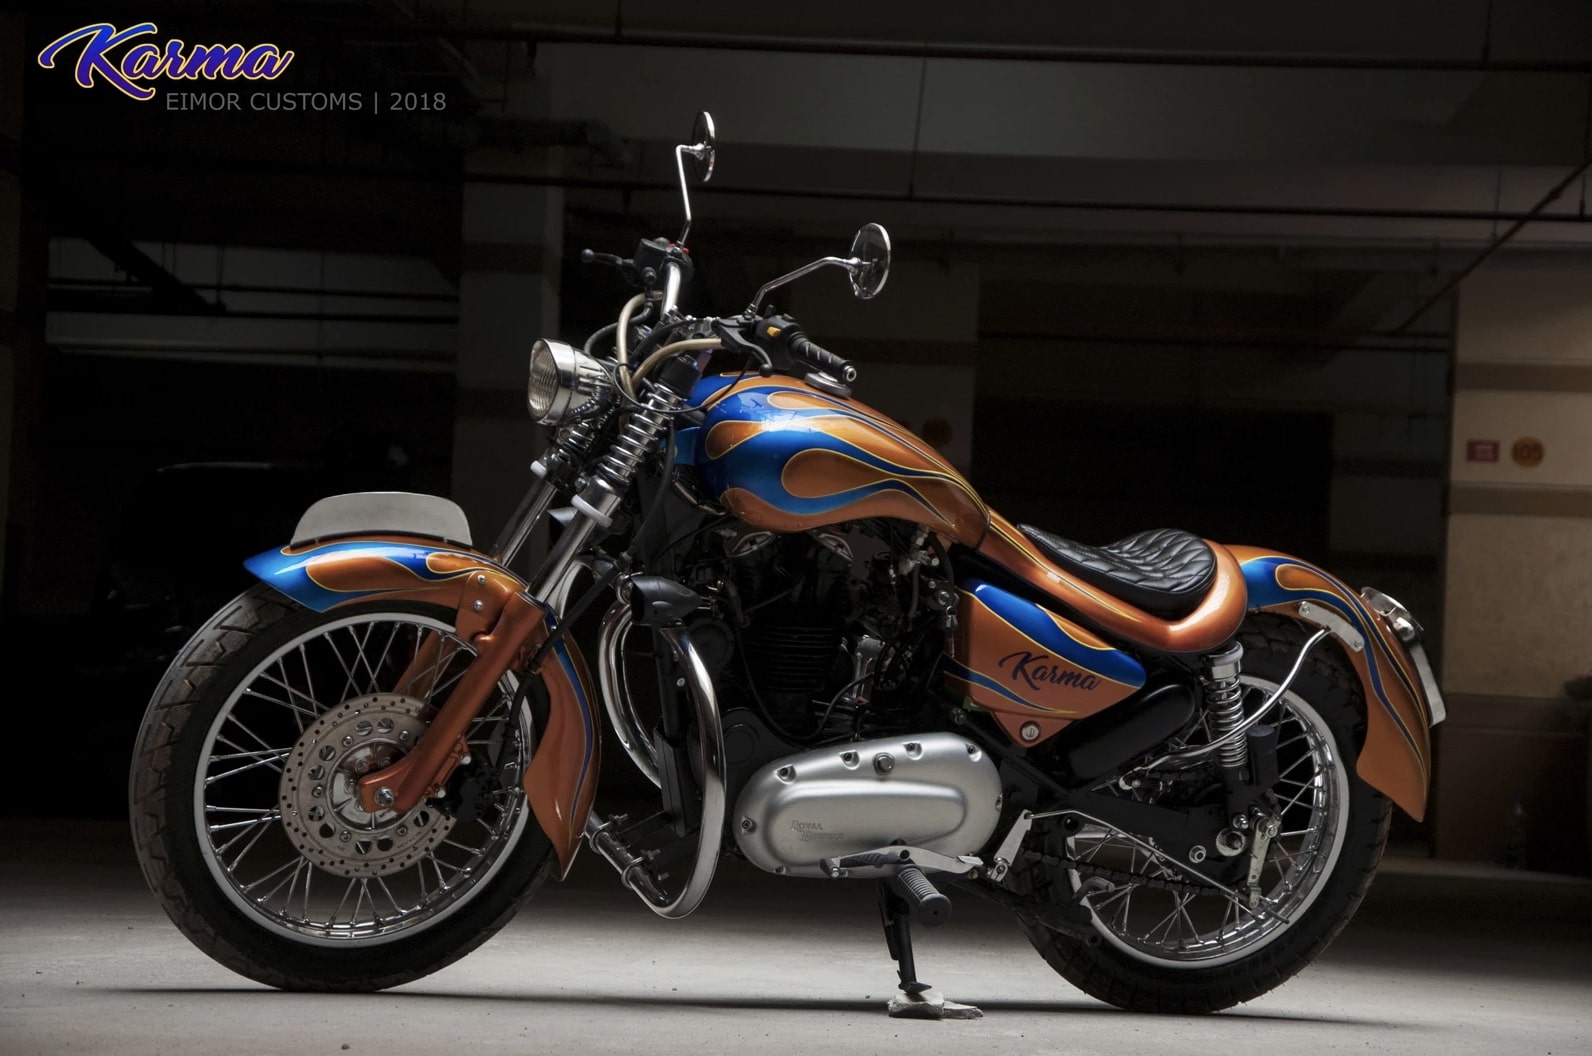 Meet Karma 350 - Based on the Royal Enfield Thunderbird Motorcycle - front